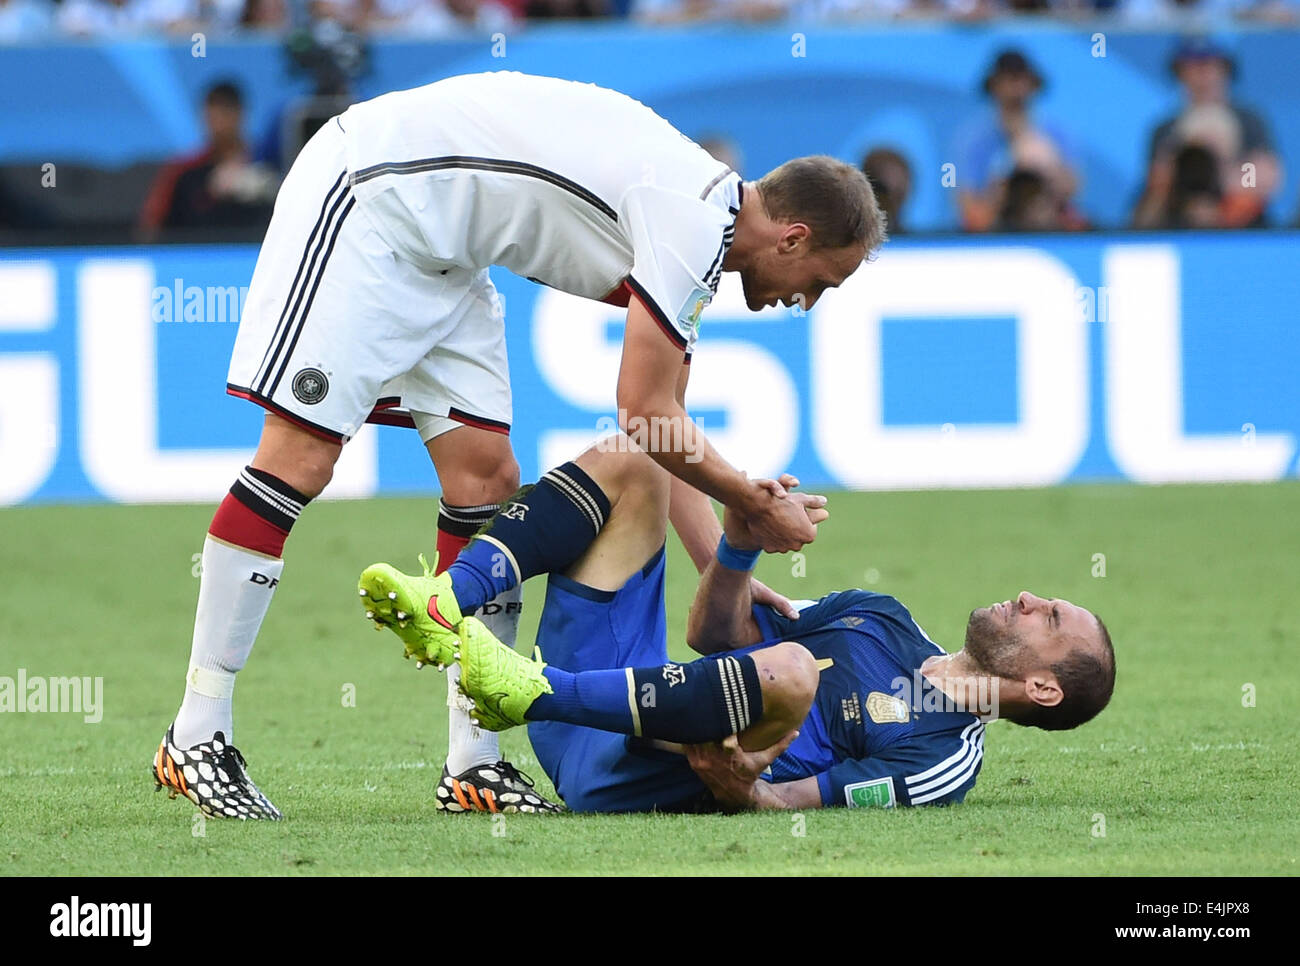 Rio De Janeiro, Brazil. 13th July, 2014. Germany's Benedikt Howedes (L) speaks with Argentina's Pablo Zabaleta during the final match between Germany and Argentina of 2014 FIFA World Cup at the Estadio do Maracana Stadium in Rio de Janeiro, Brazil, on July 13, 2014. Credit:  Liu Dawei/Xinhua/Alamy Live News Stock Photo